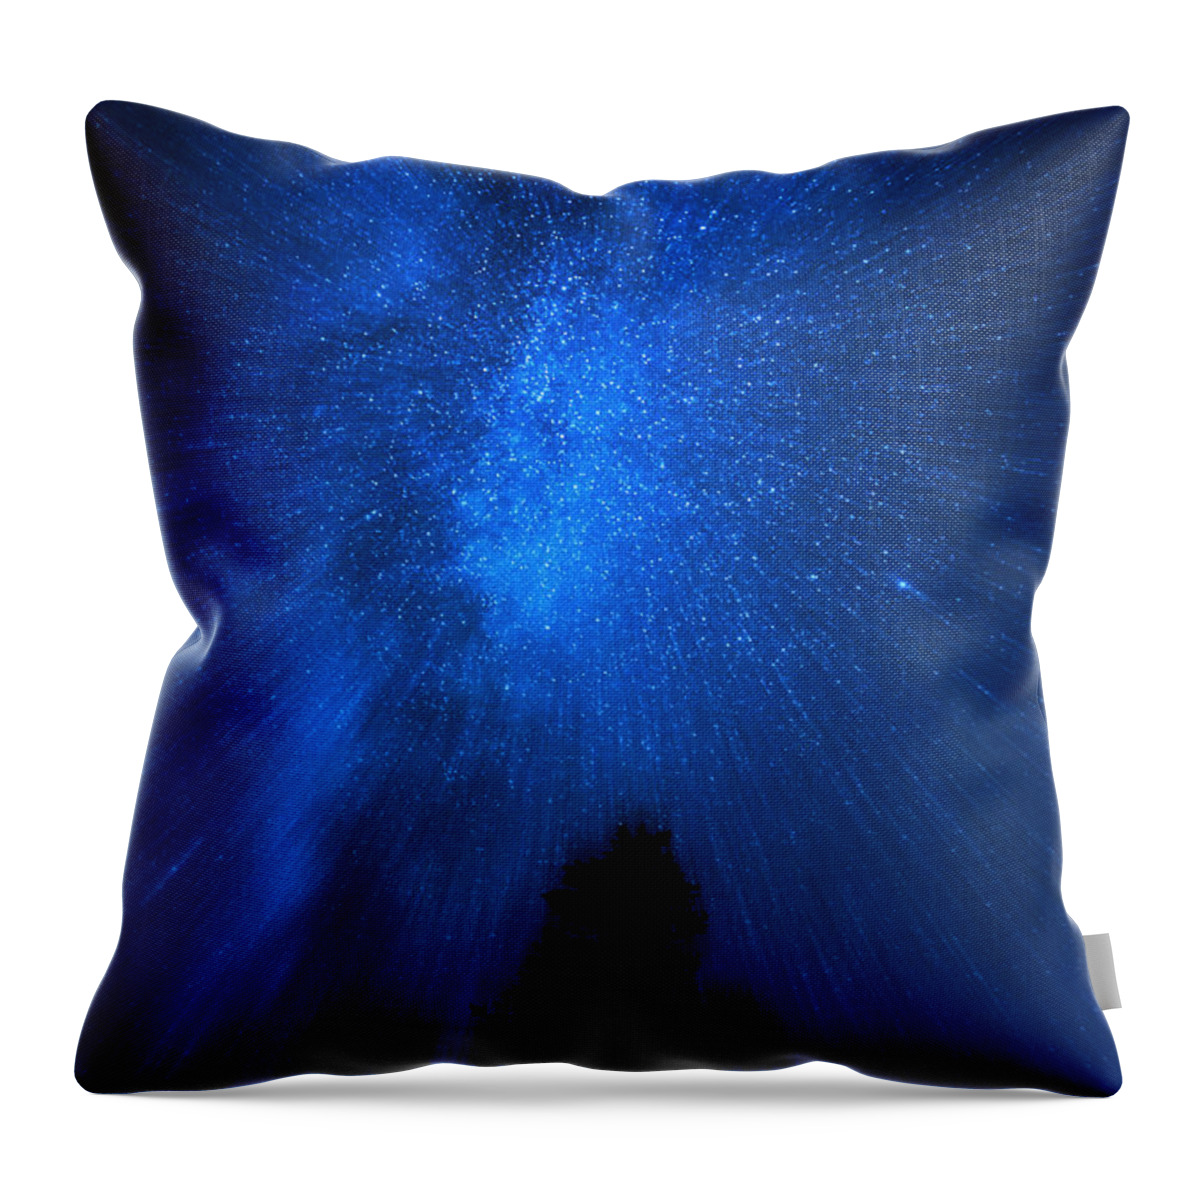 Milkyway Throw Pillow featuring the digital art Milky Way Zoom by Pelo Blanco Photo